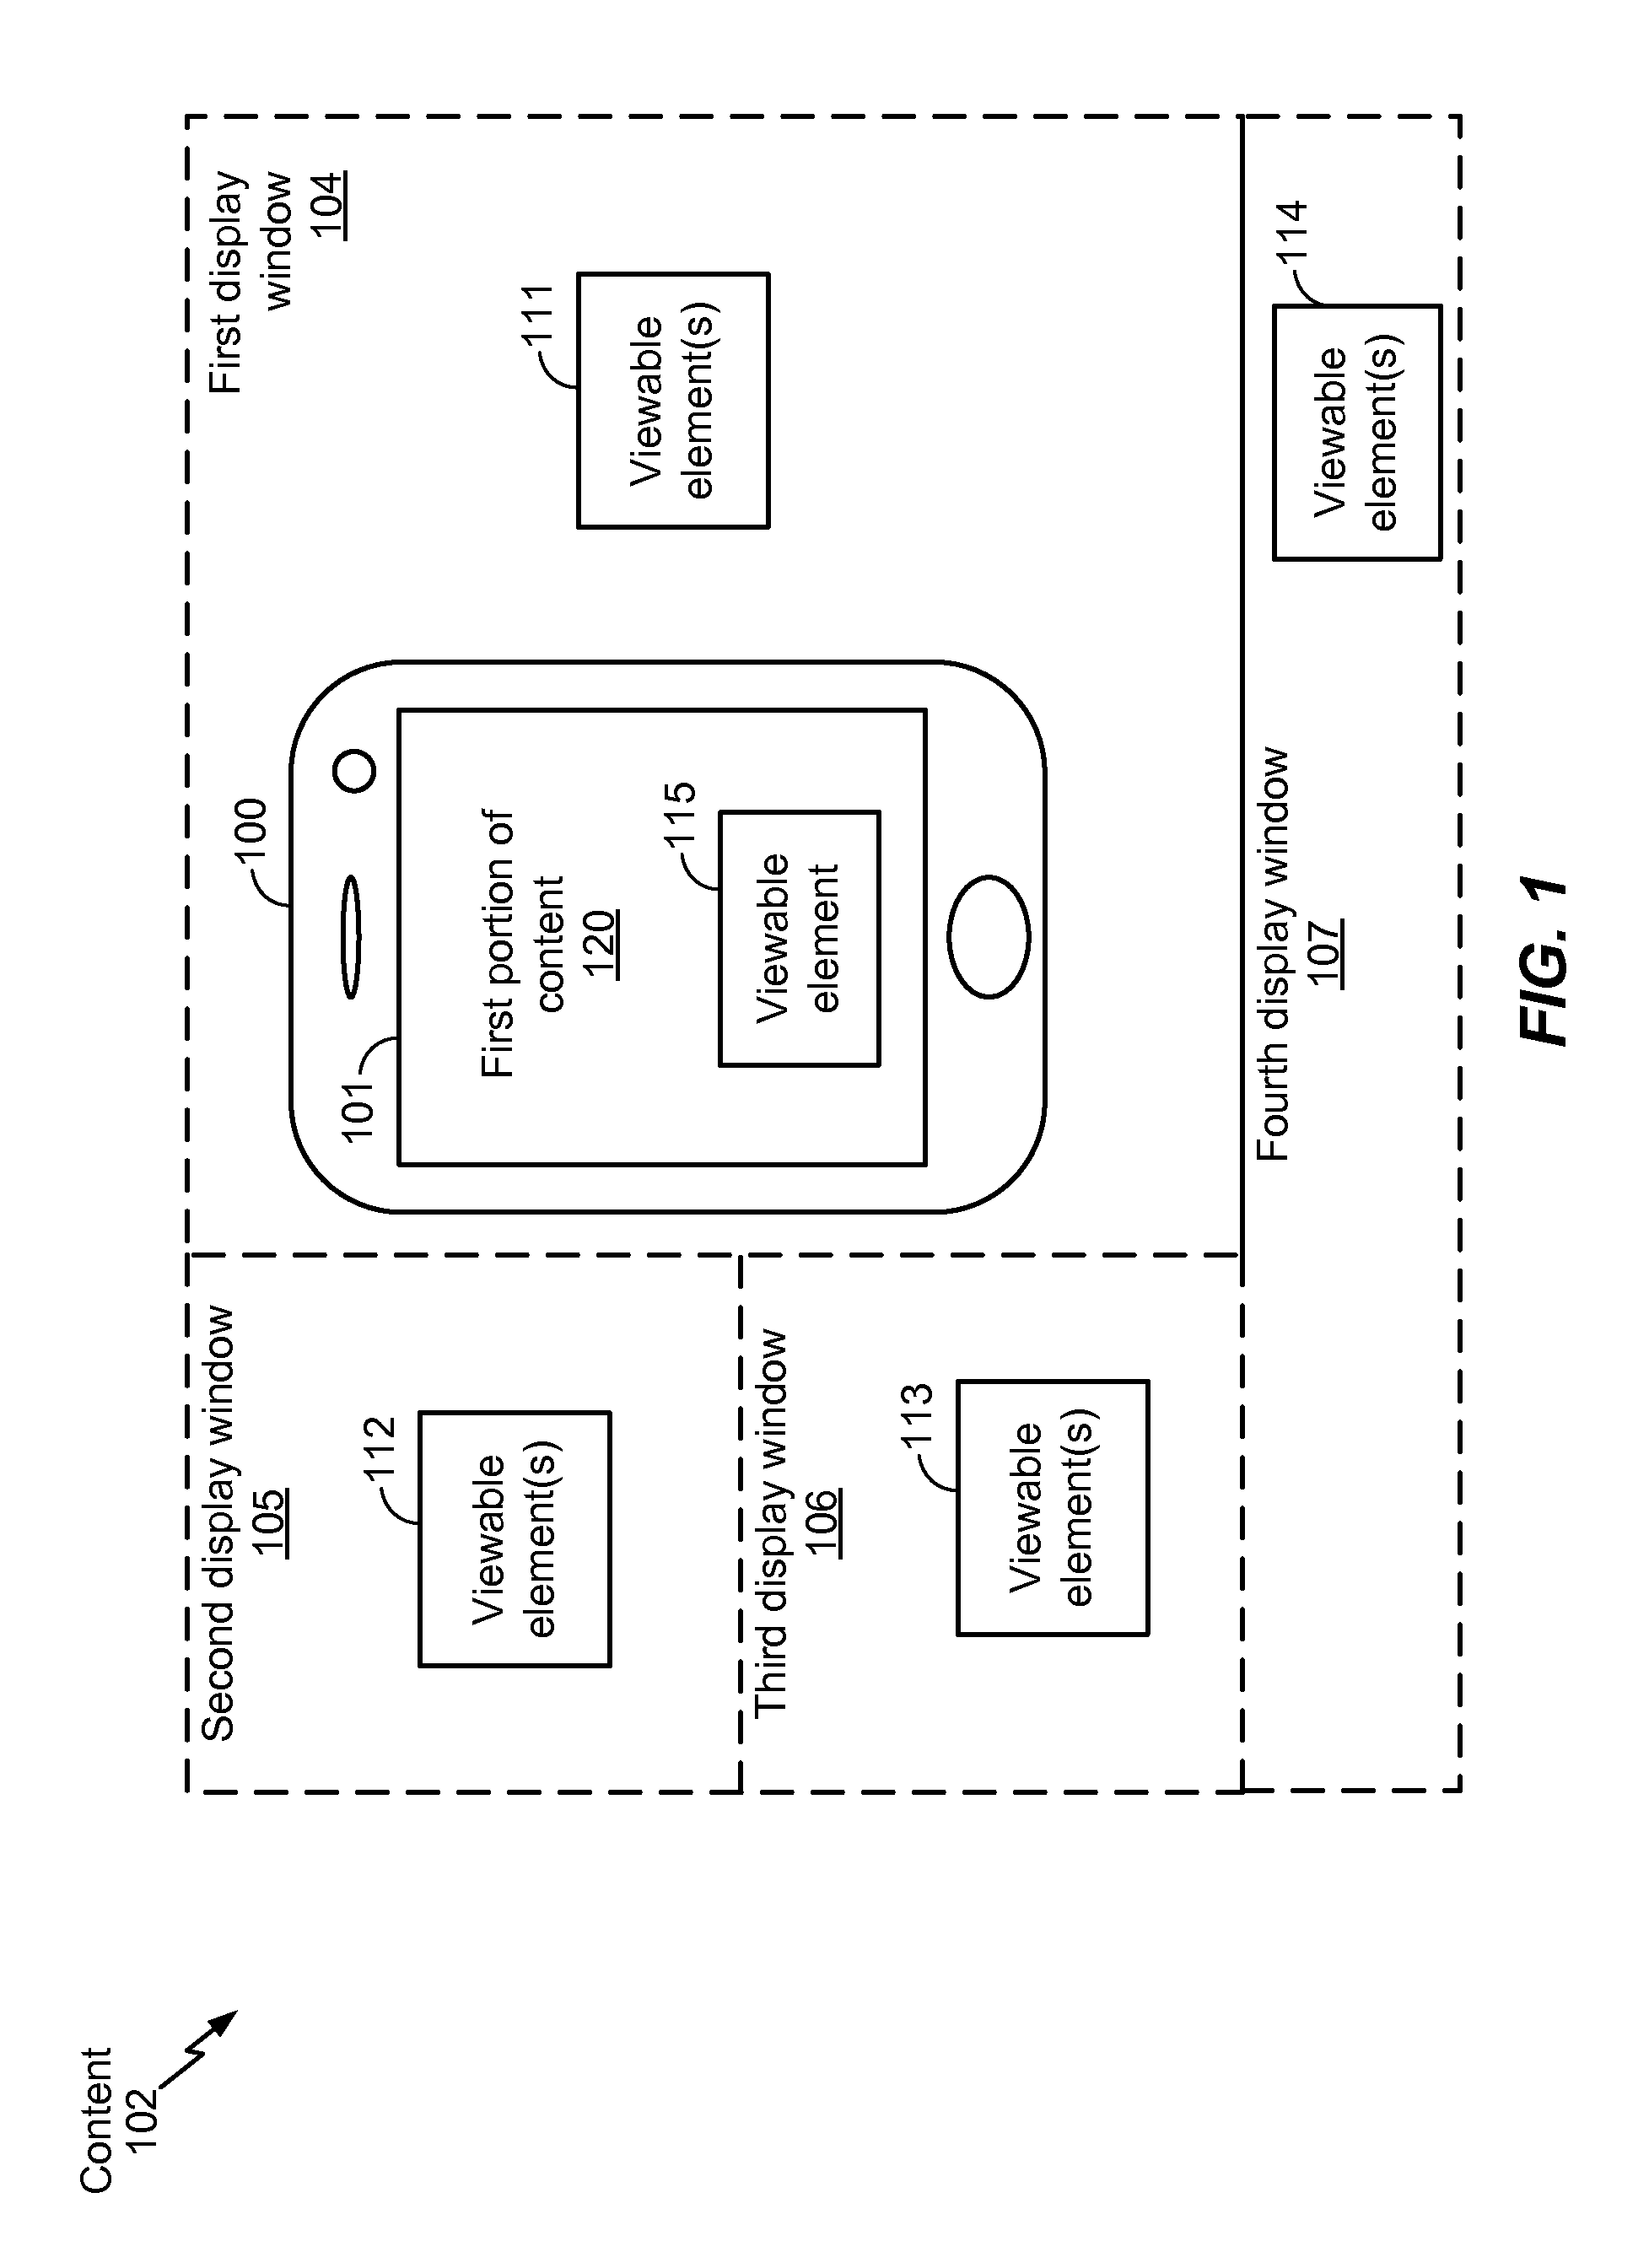 System and method to display content based on viewing orientation